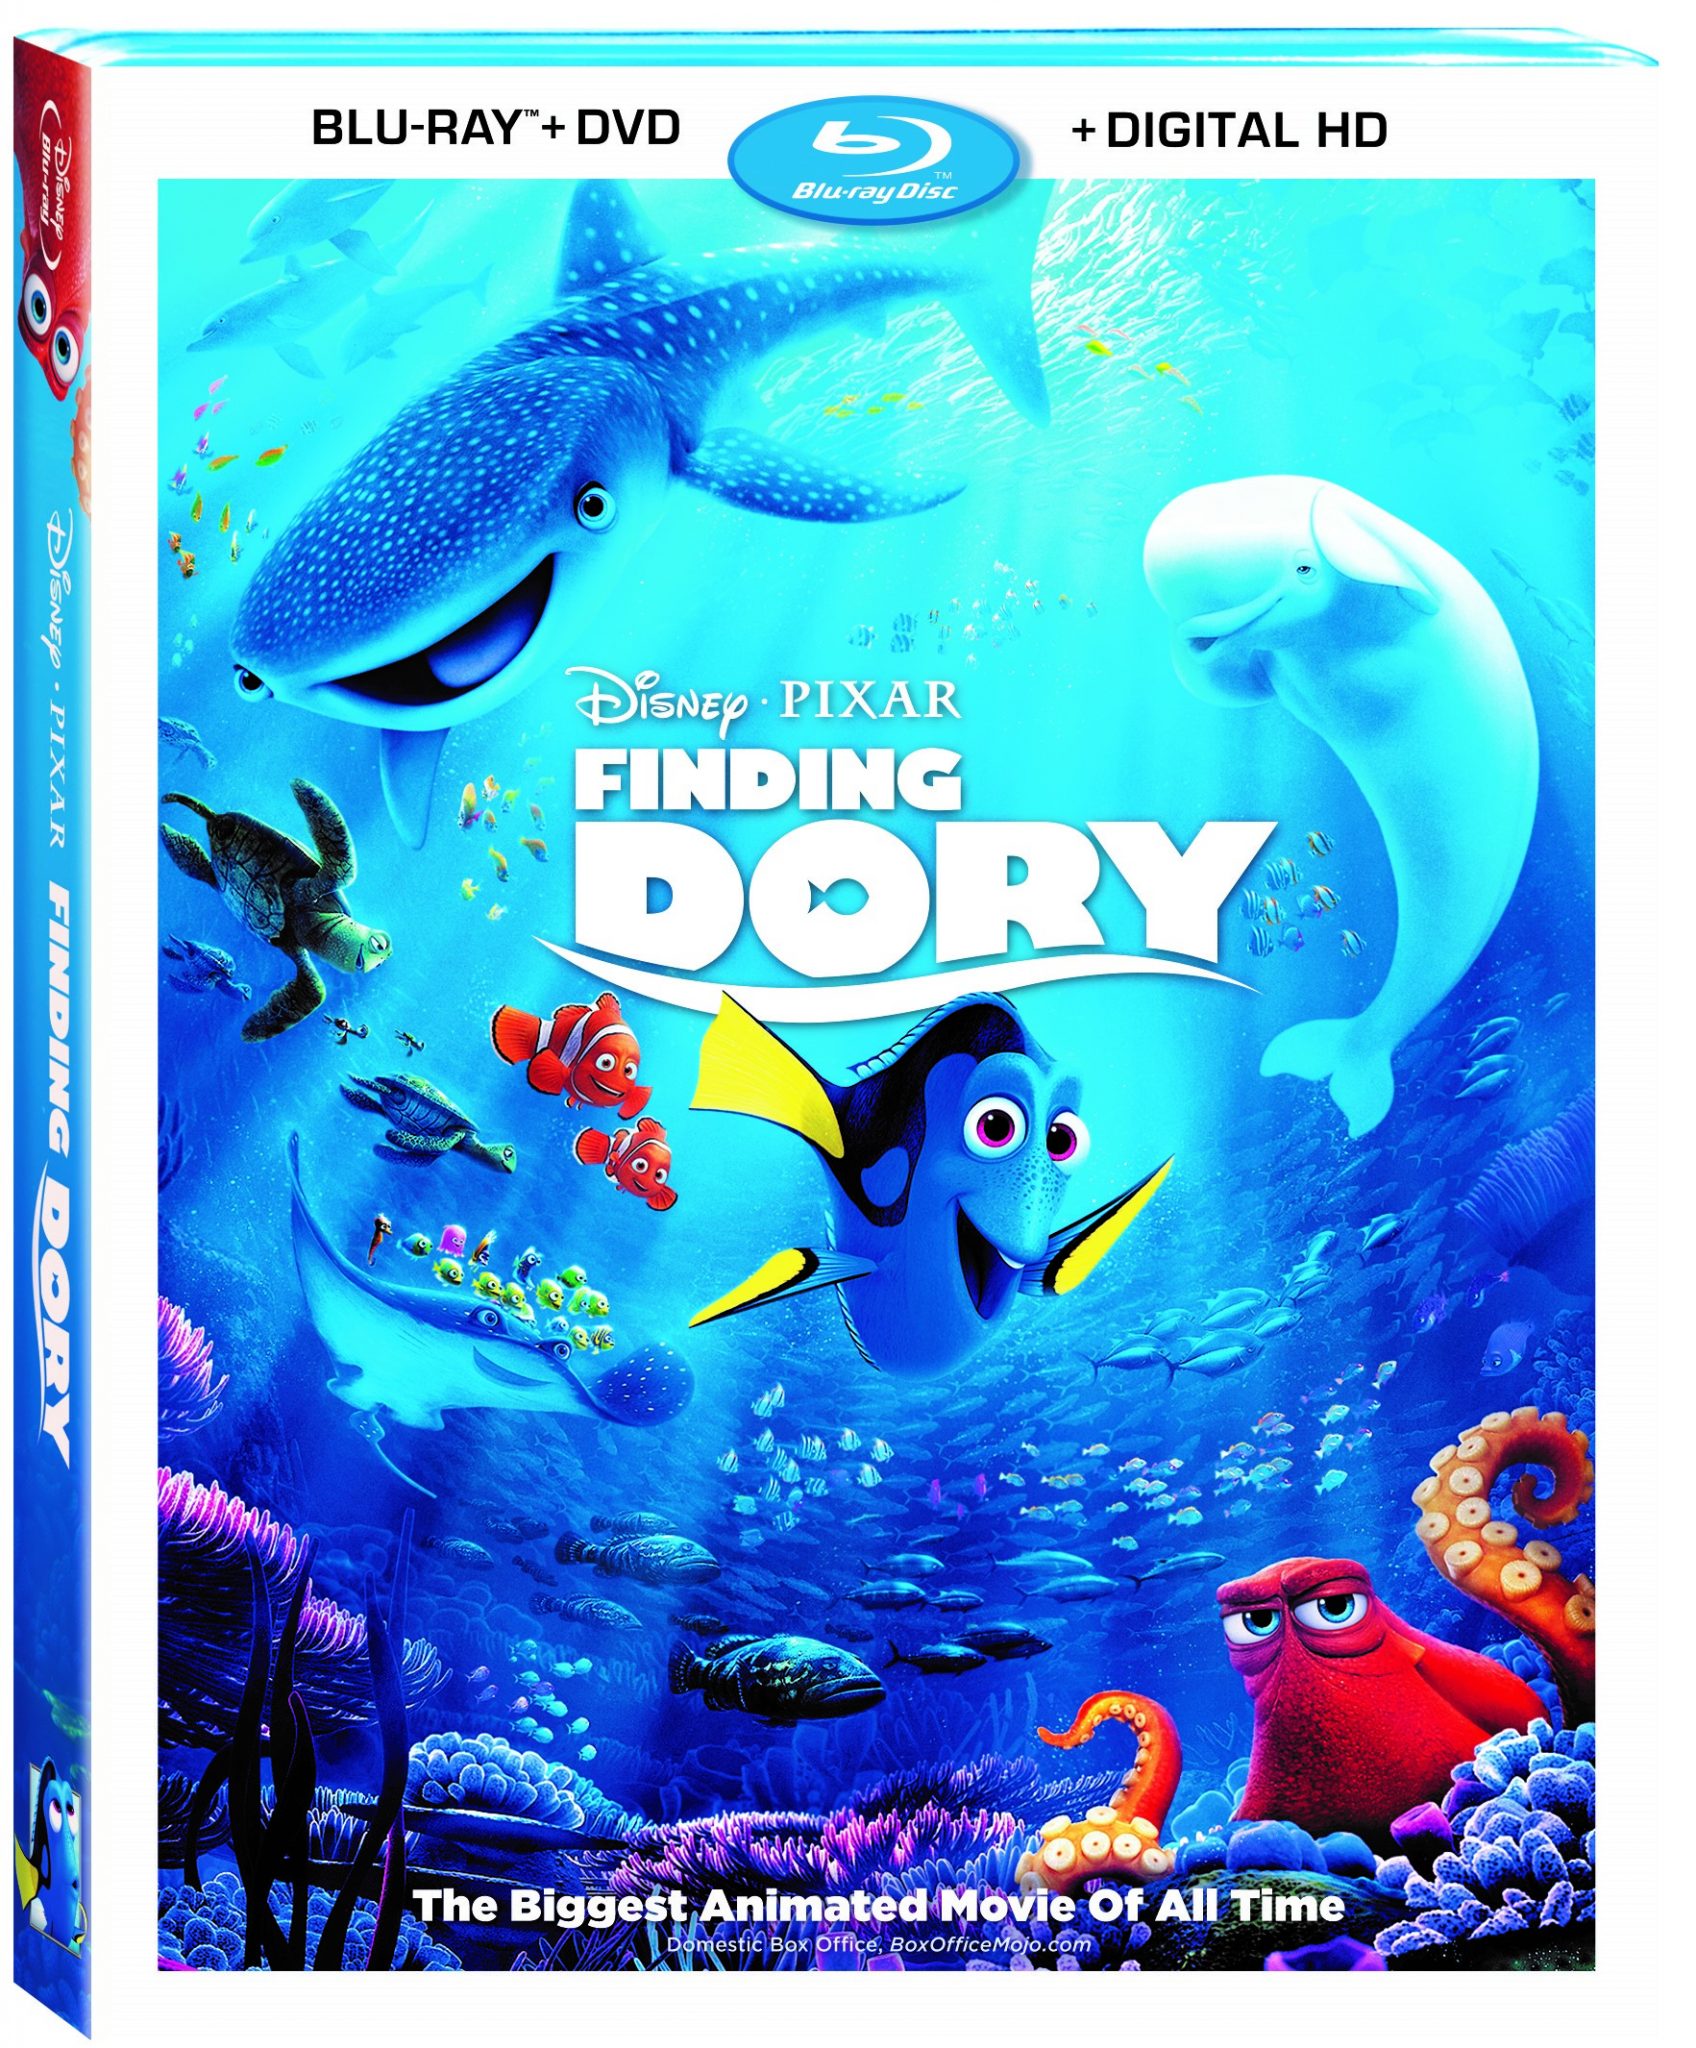 Disney and Pixar’s ‘Finding Dory’ Swims to Blu-ray Nov. 15